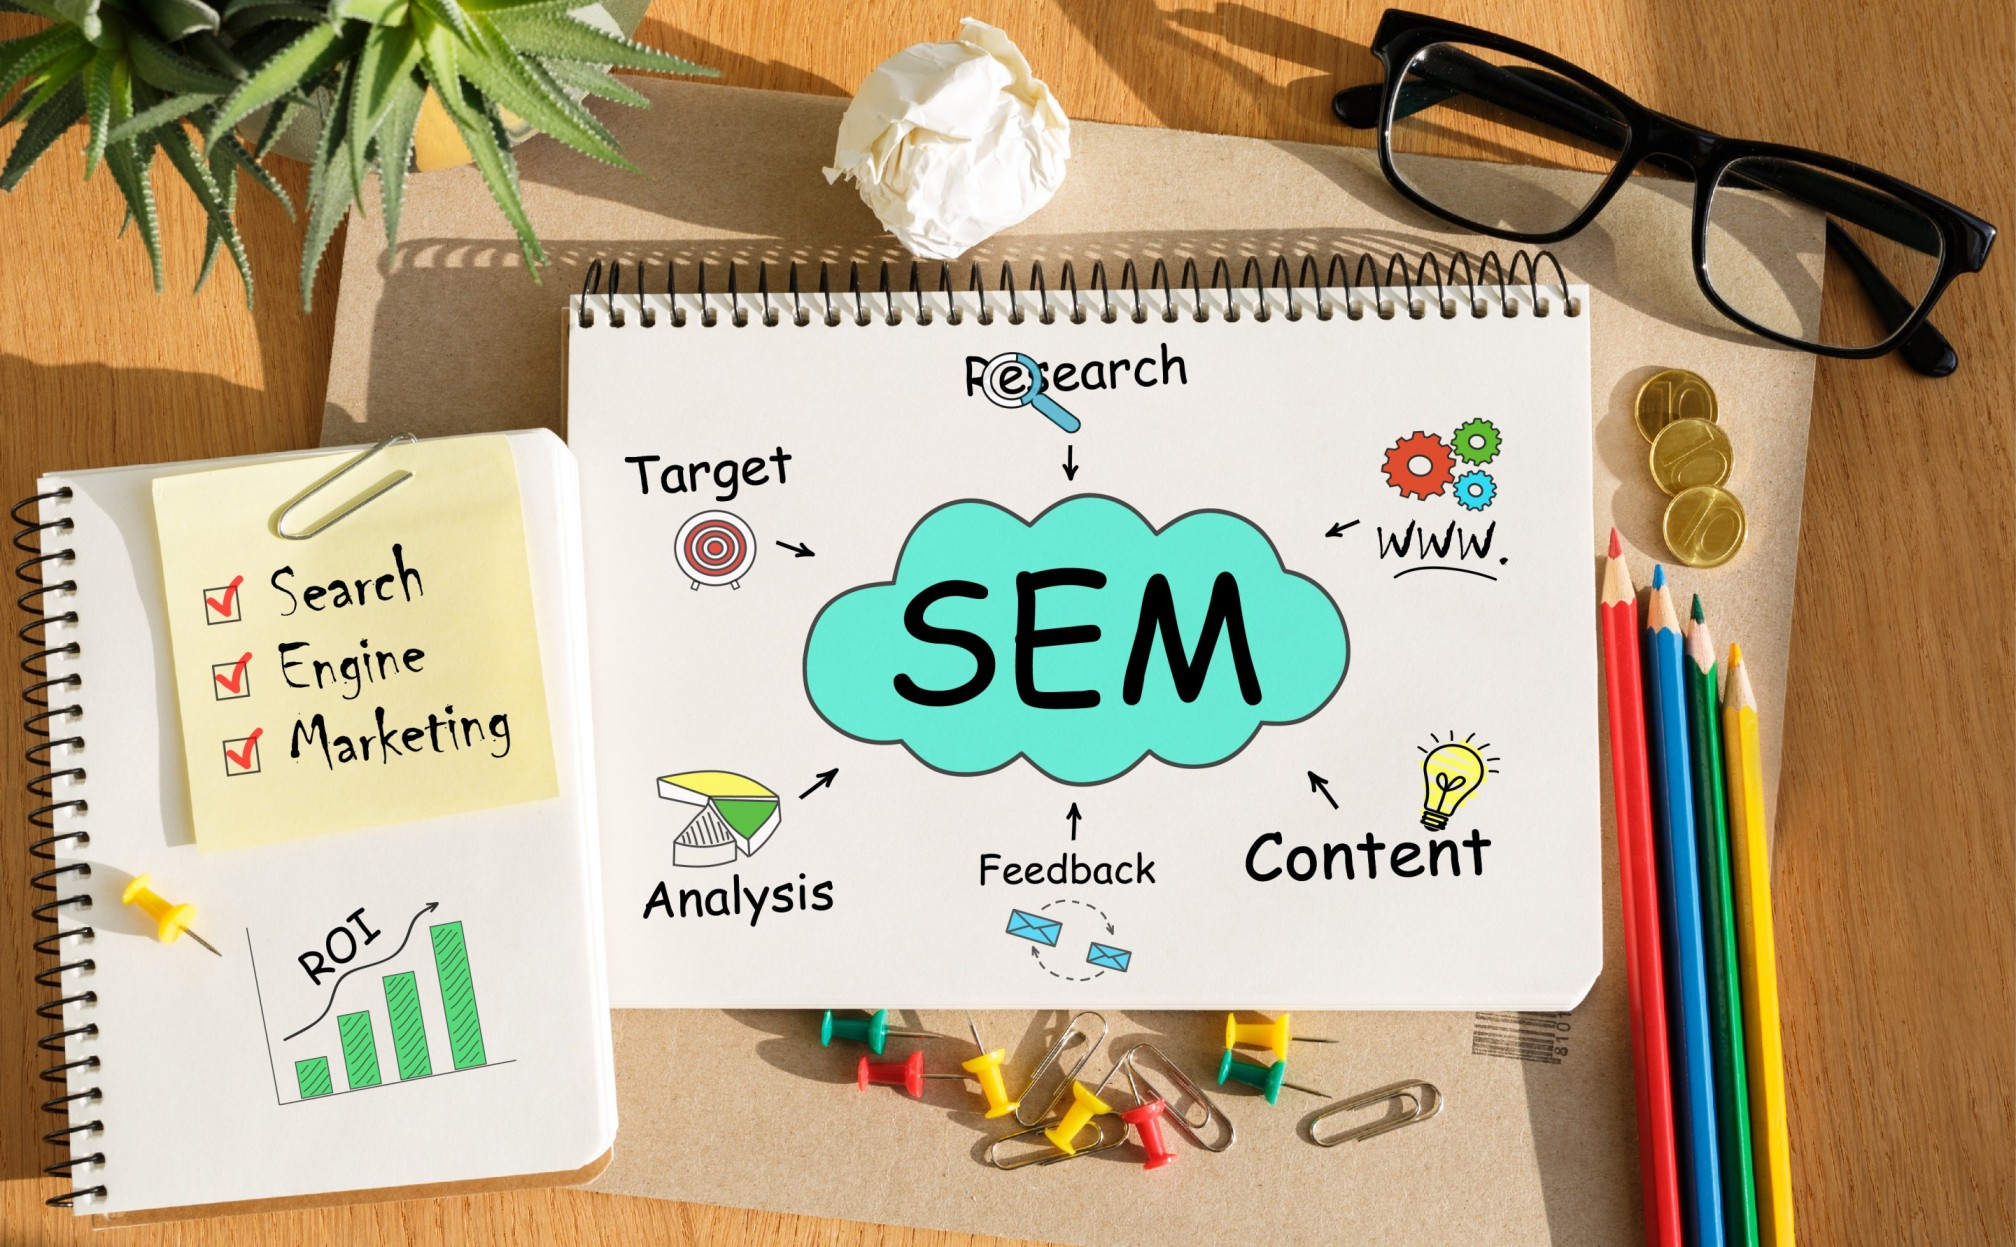 Why go for Search Engine Marketing? image